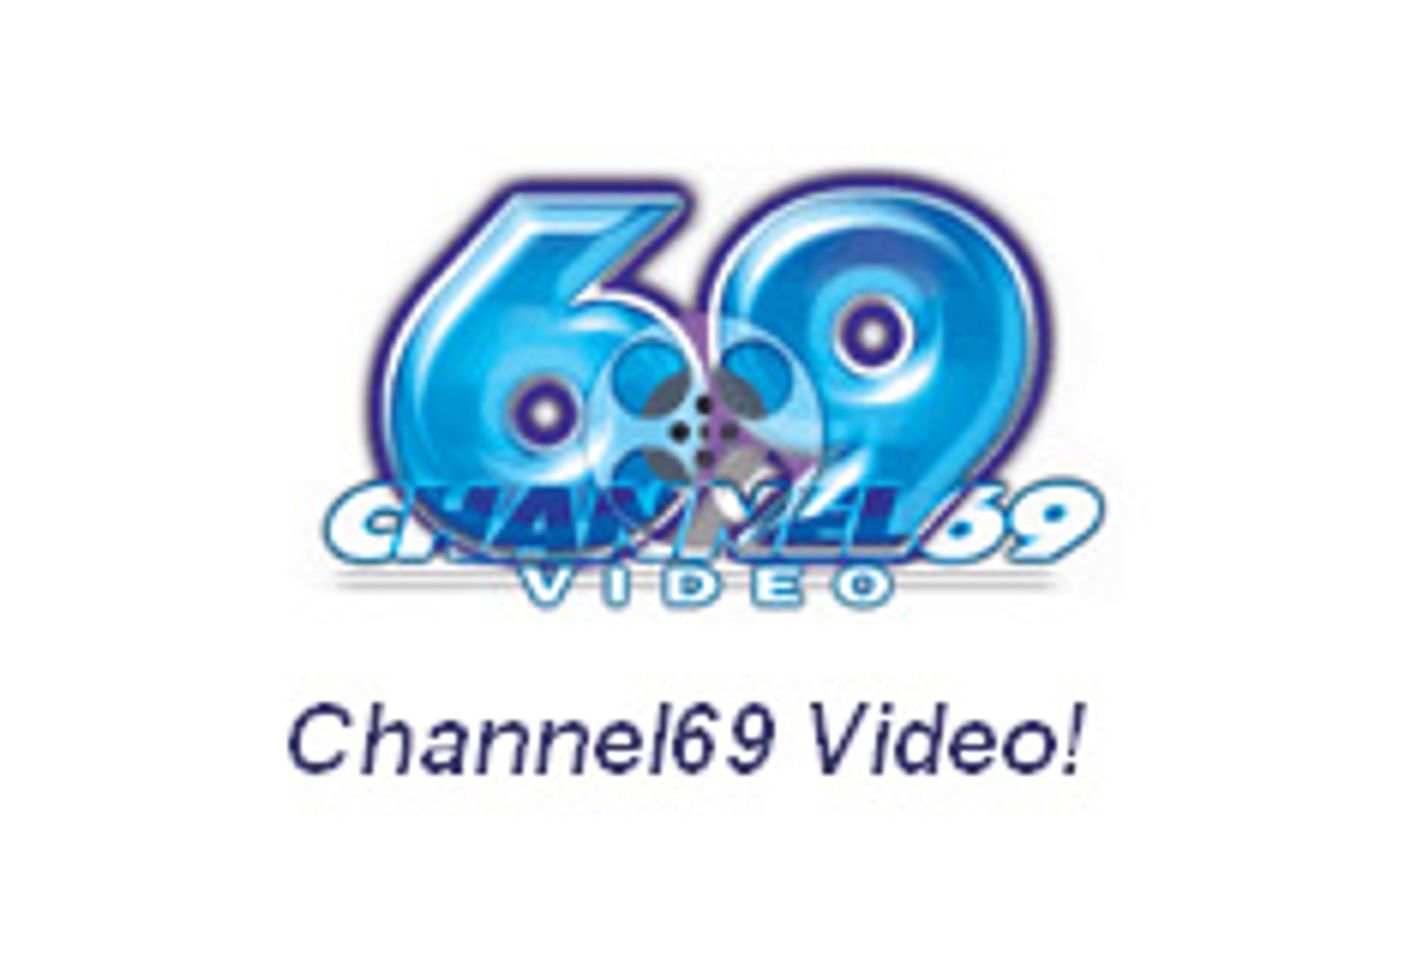 Channel69 Reveals Redesigned Portal, New Pay Sites